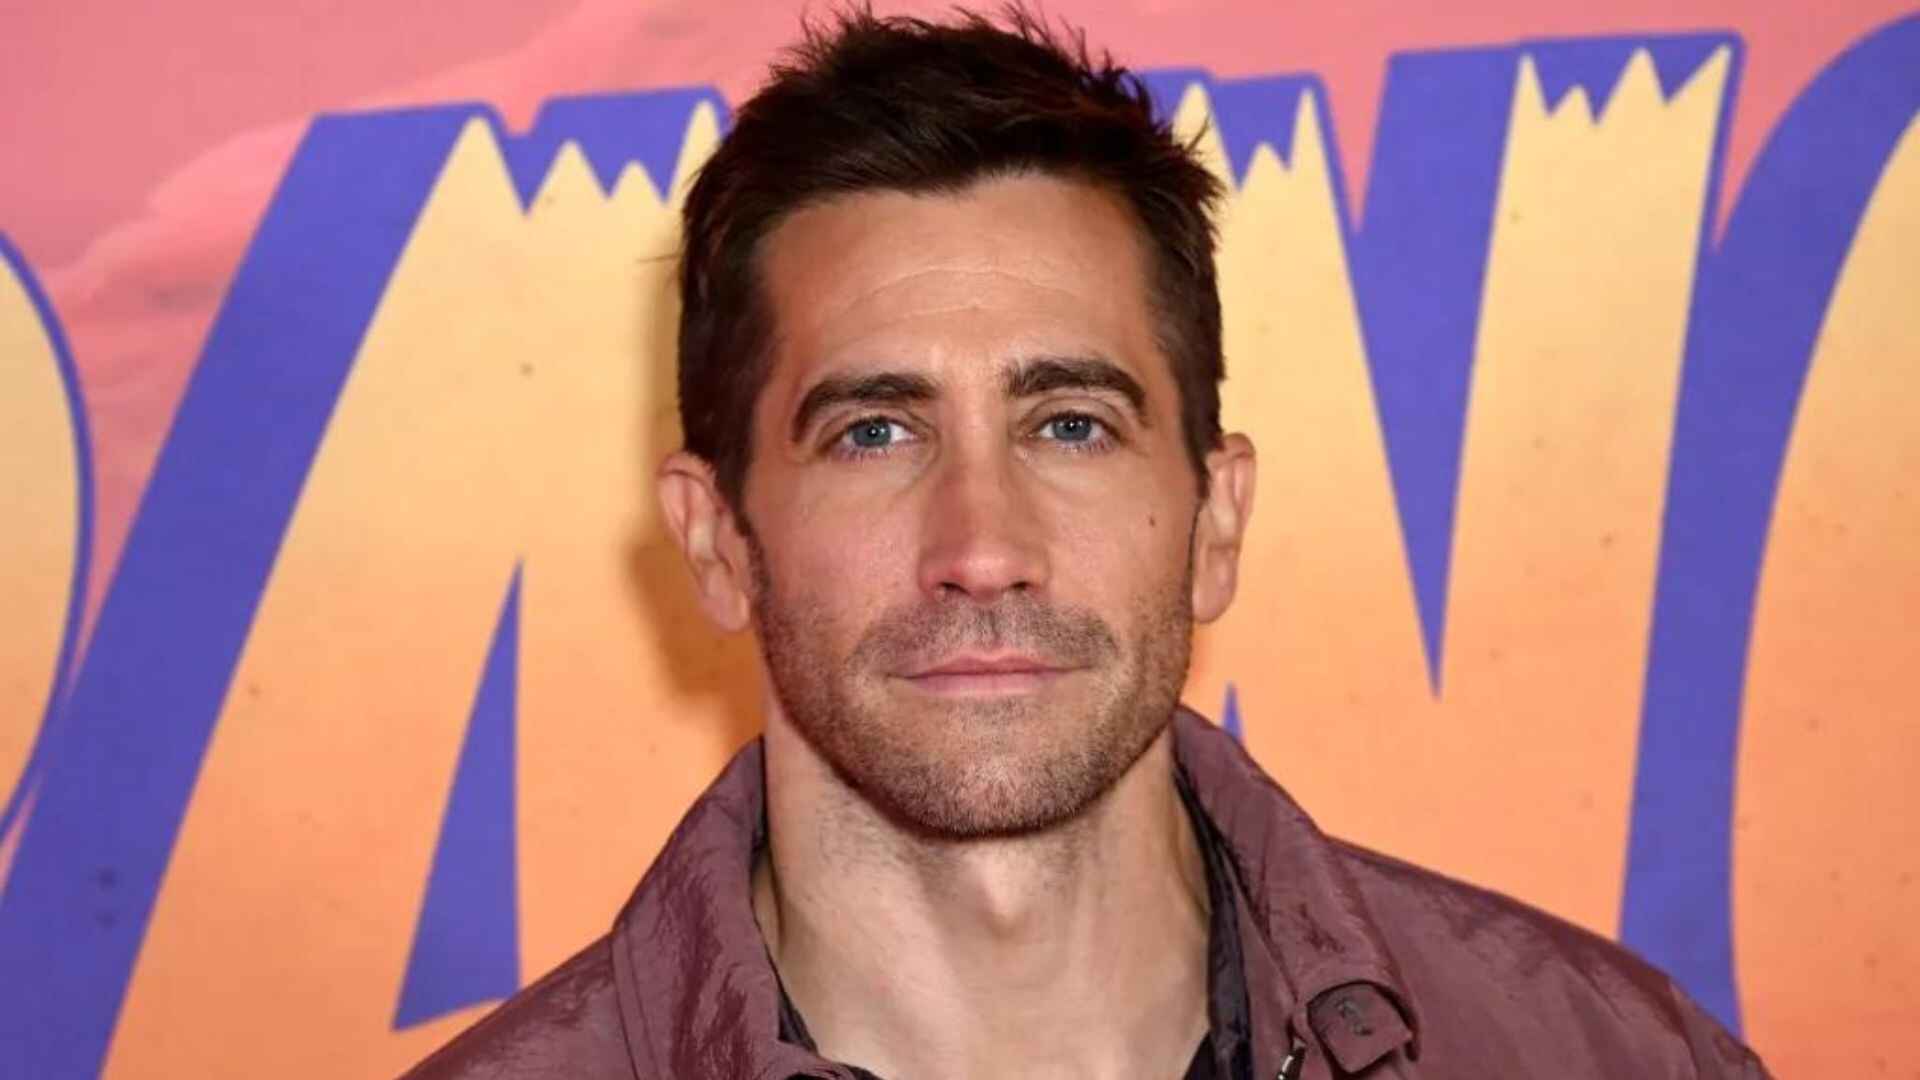 Jake Gyllenhaal To Reprise His Role In ‘Road House’ Sequel